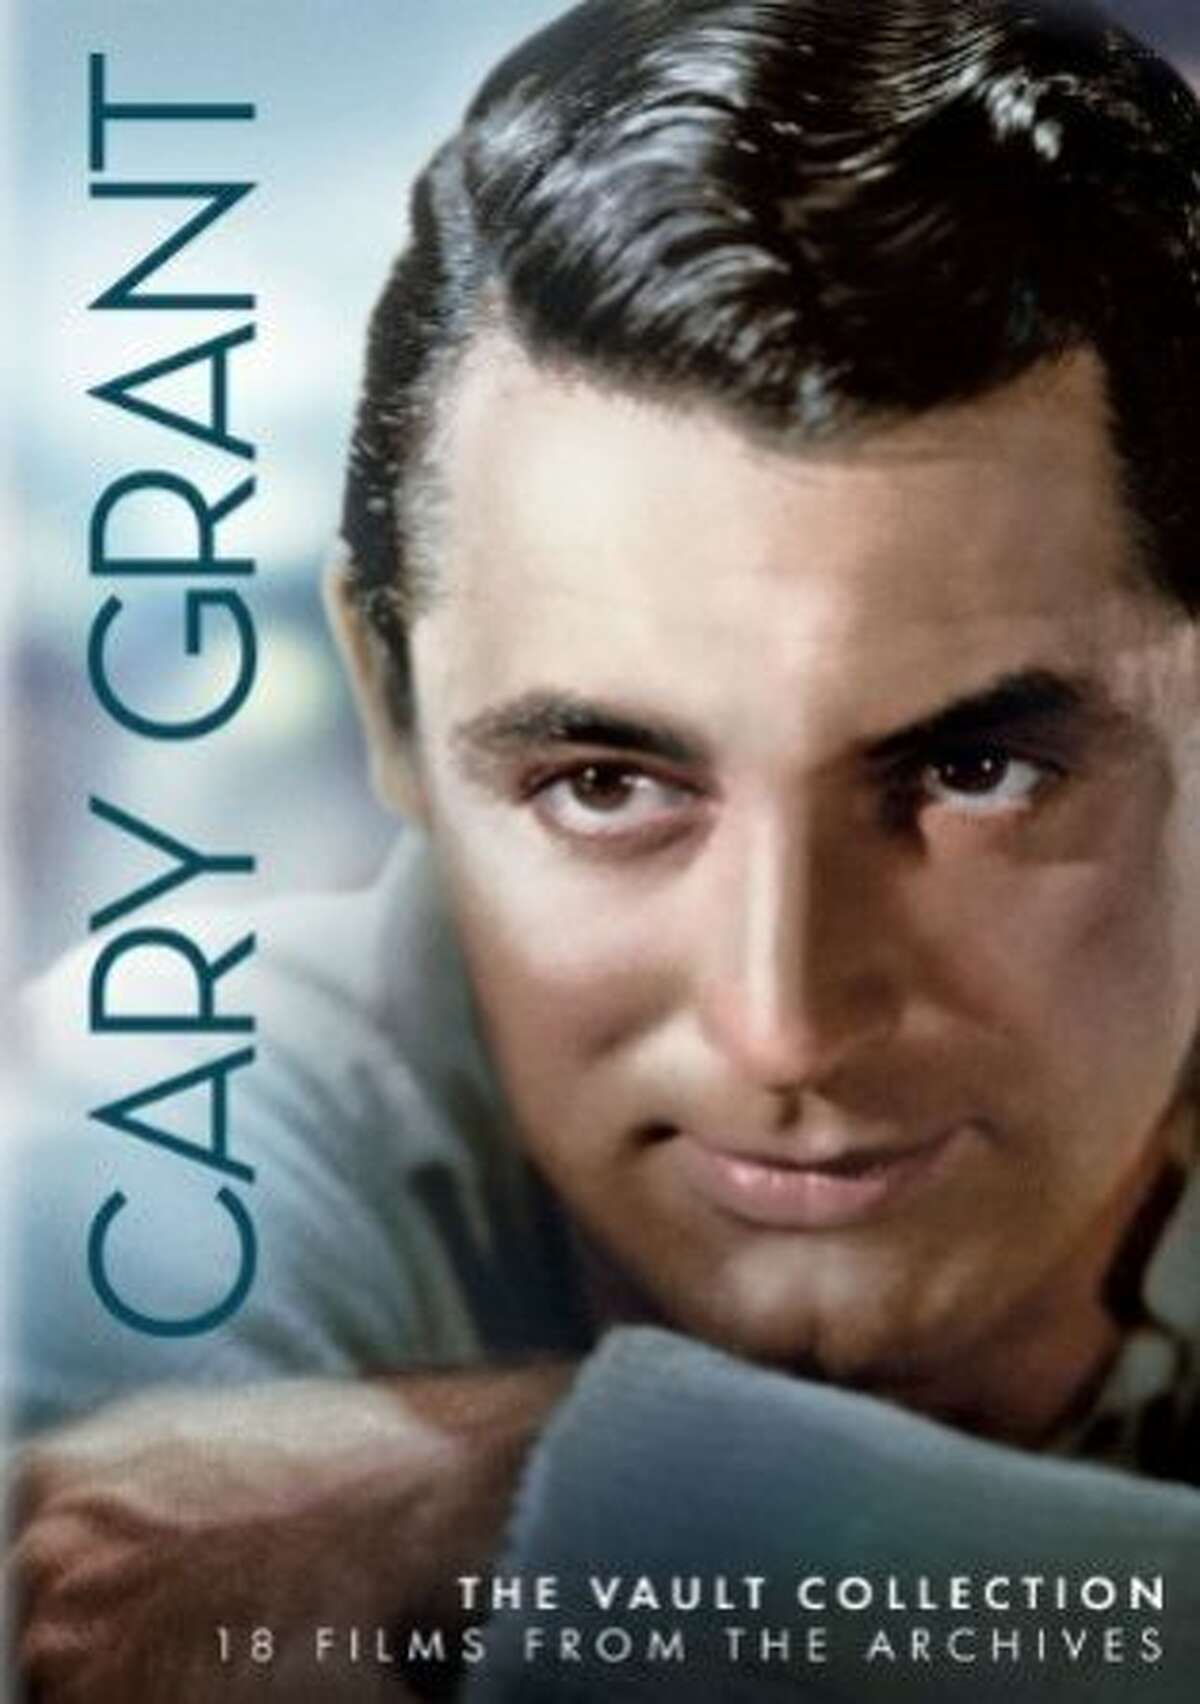 dvd cover: "Cary Grant: The Vault Collection"